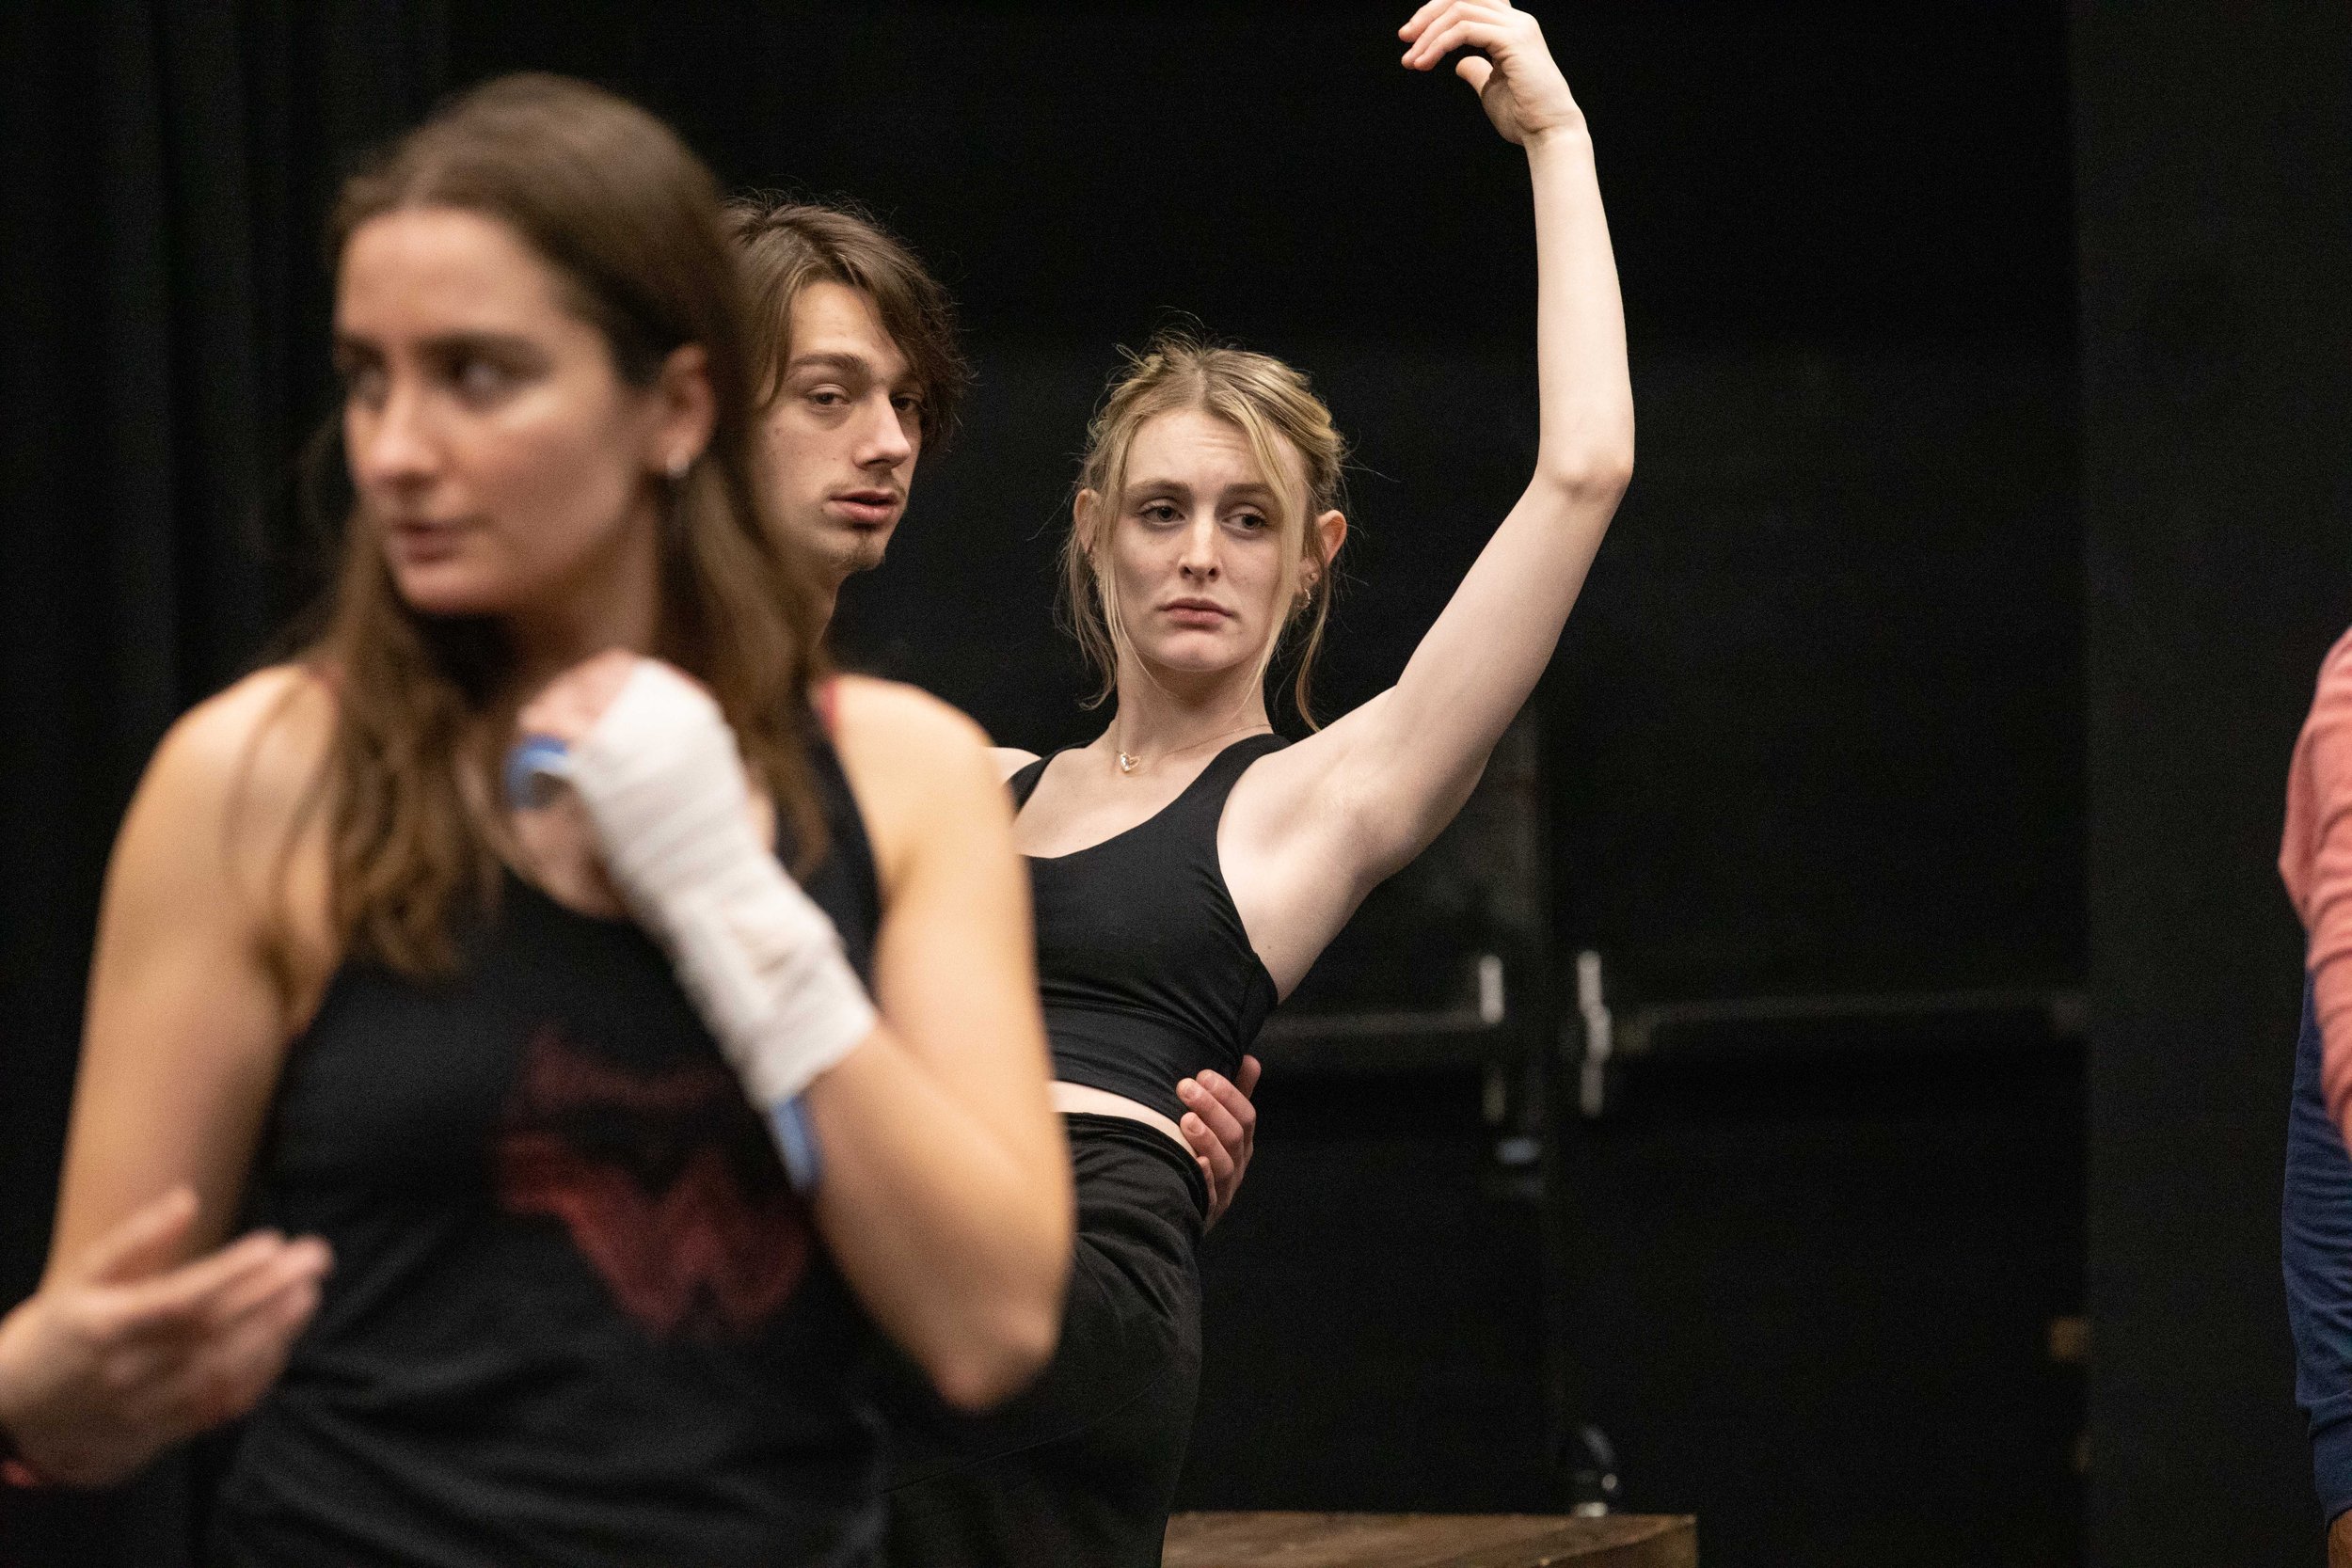  In the back, SMC students Allie Jensen (right) with her dancing partner classmate Myckinnon Forsyth glancing back for instructions from teachers offscreen at a class rehearsal for the musical “Hunchback of Notredame”. Theater Arts building at SMC ma